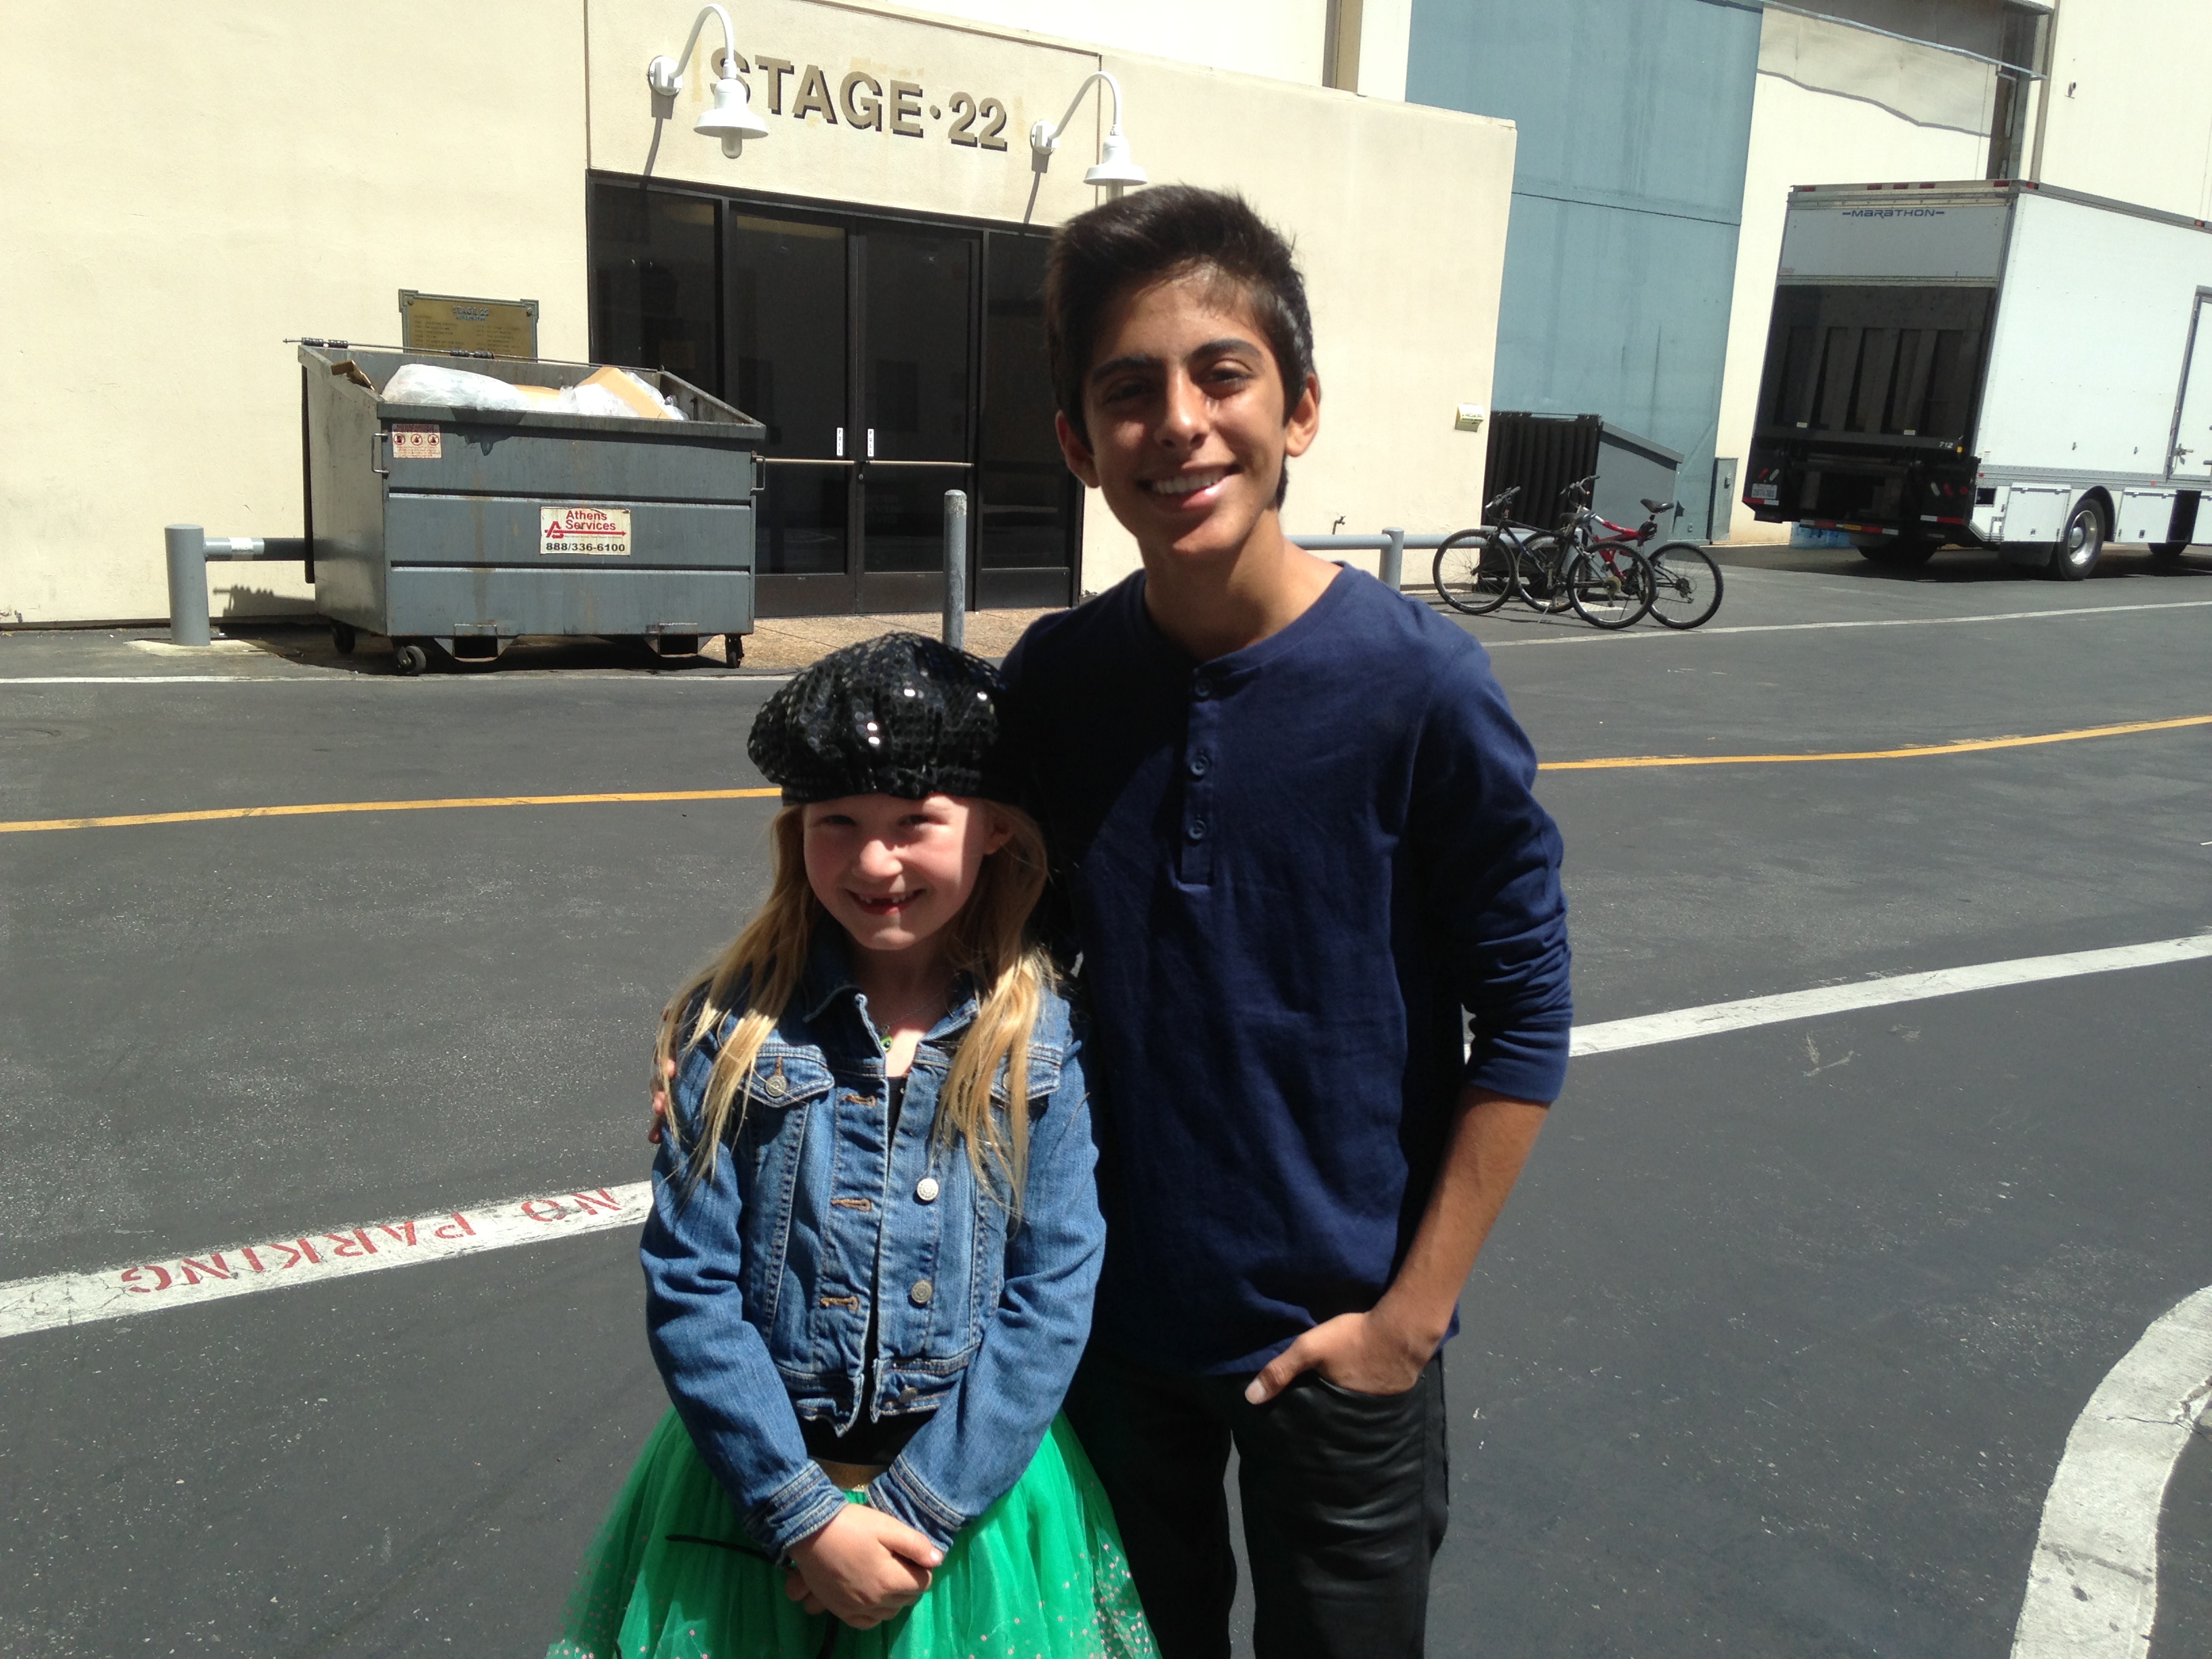 Actress Abigail Zoe Lewis meets Karan Brar at the Points of Light generationOn Block Party on April 18, 2015 in Los Angeles, California.